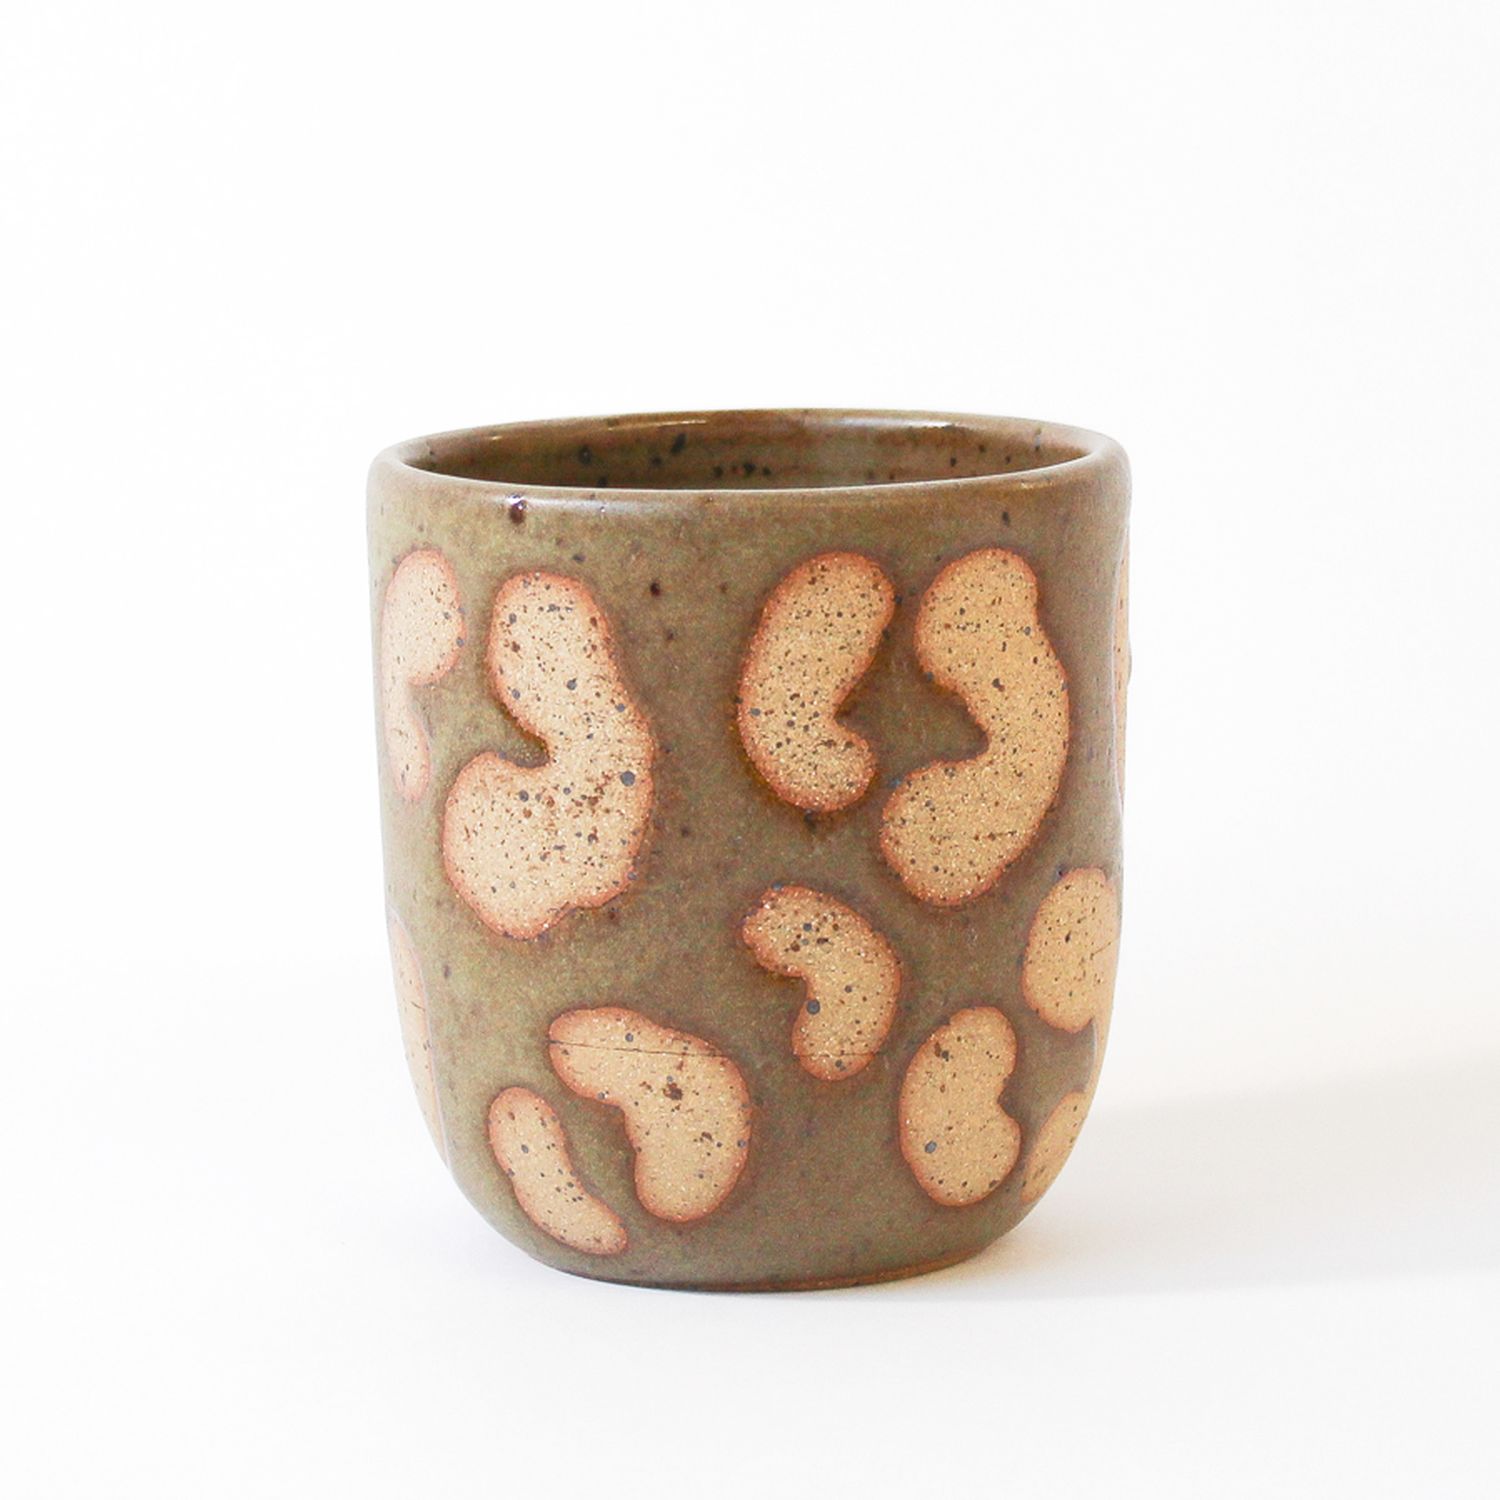 Mima Ceramics: Small Cup Green Product Image 1 of 1